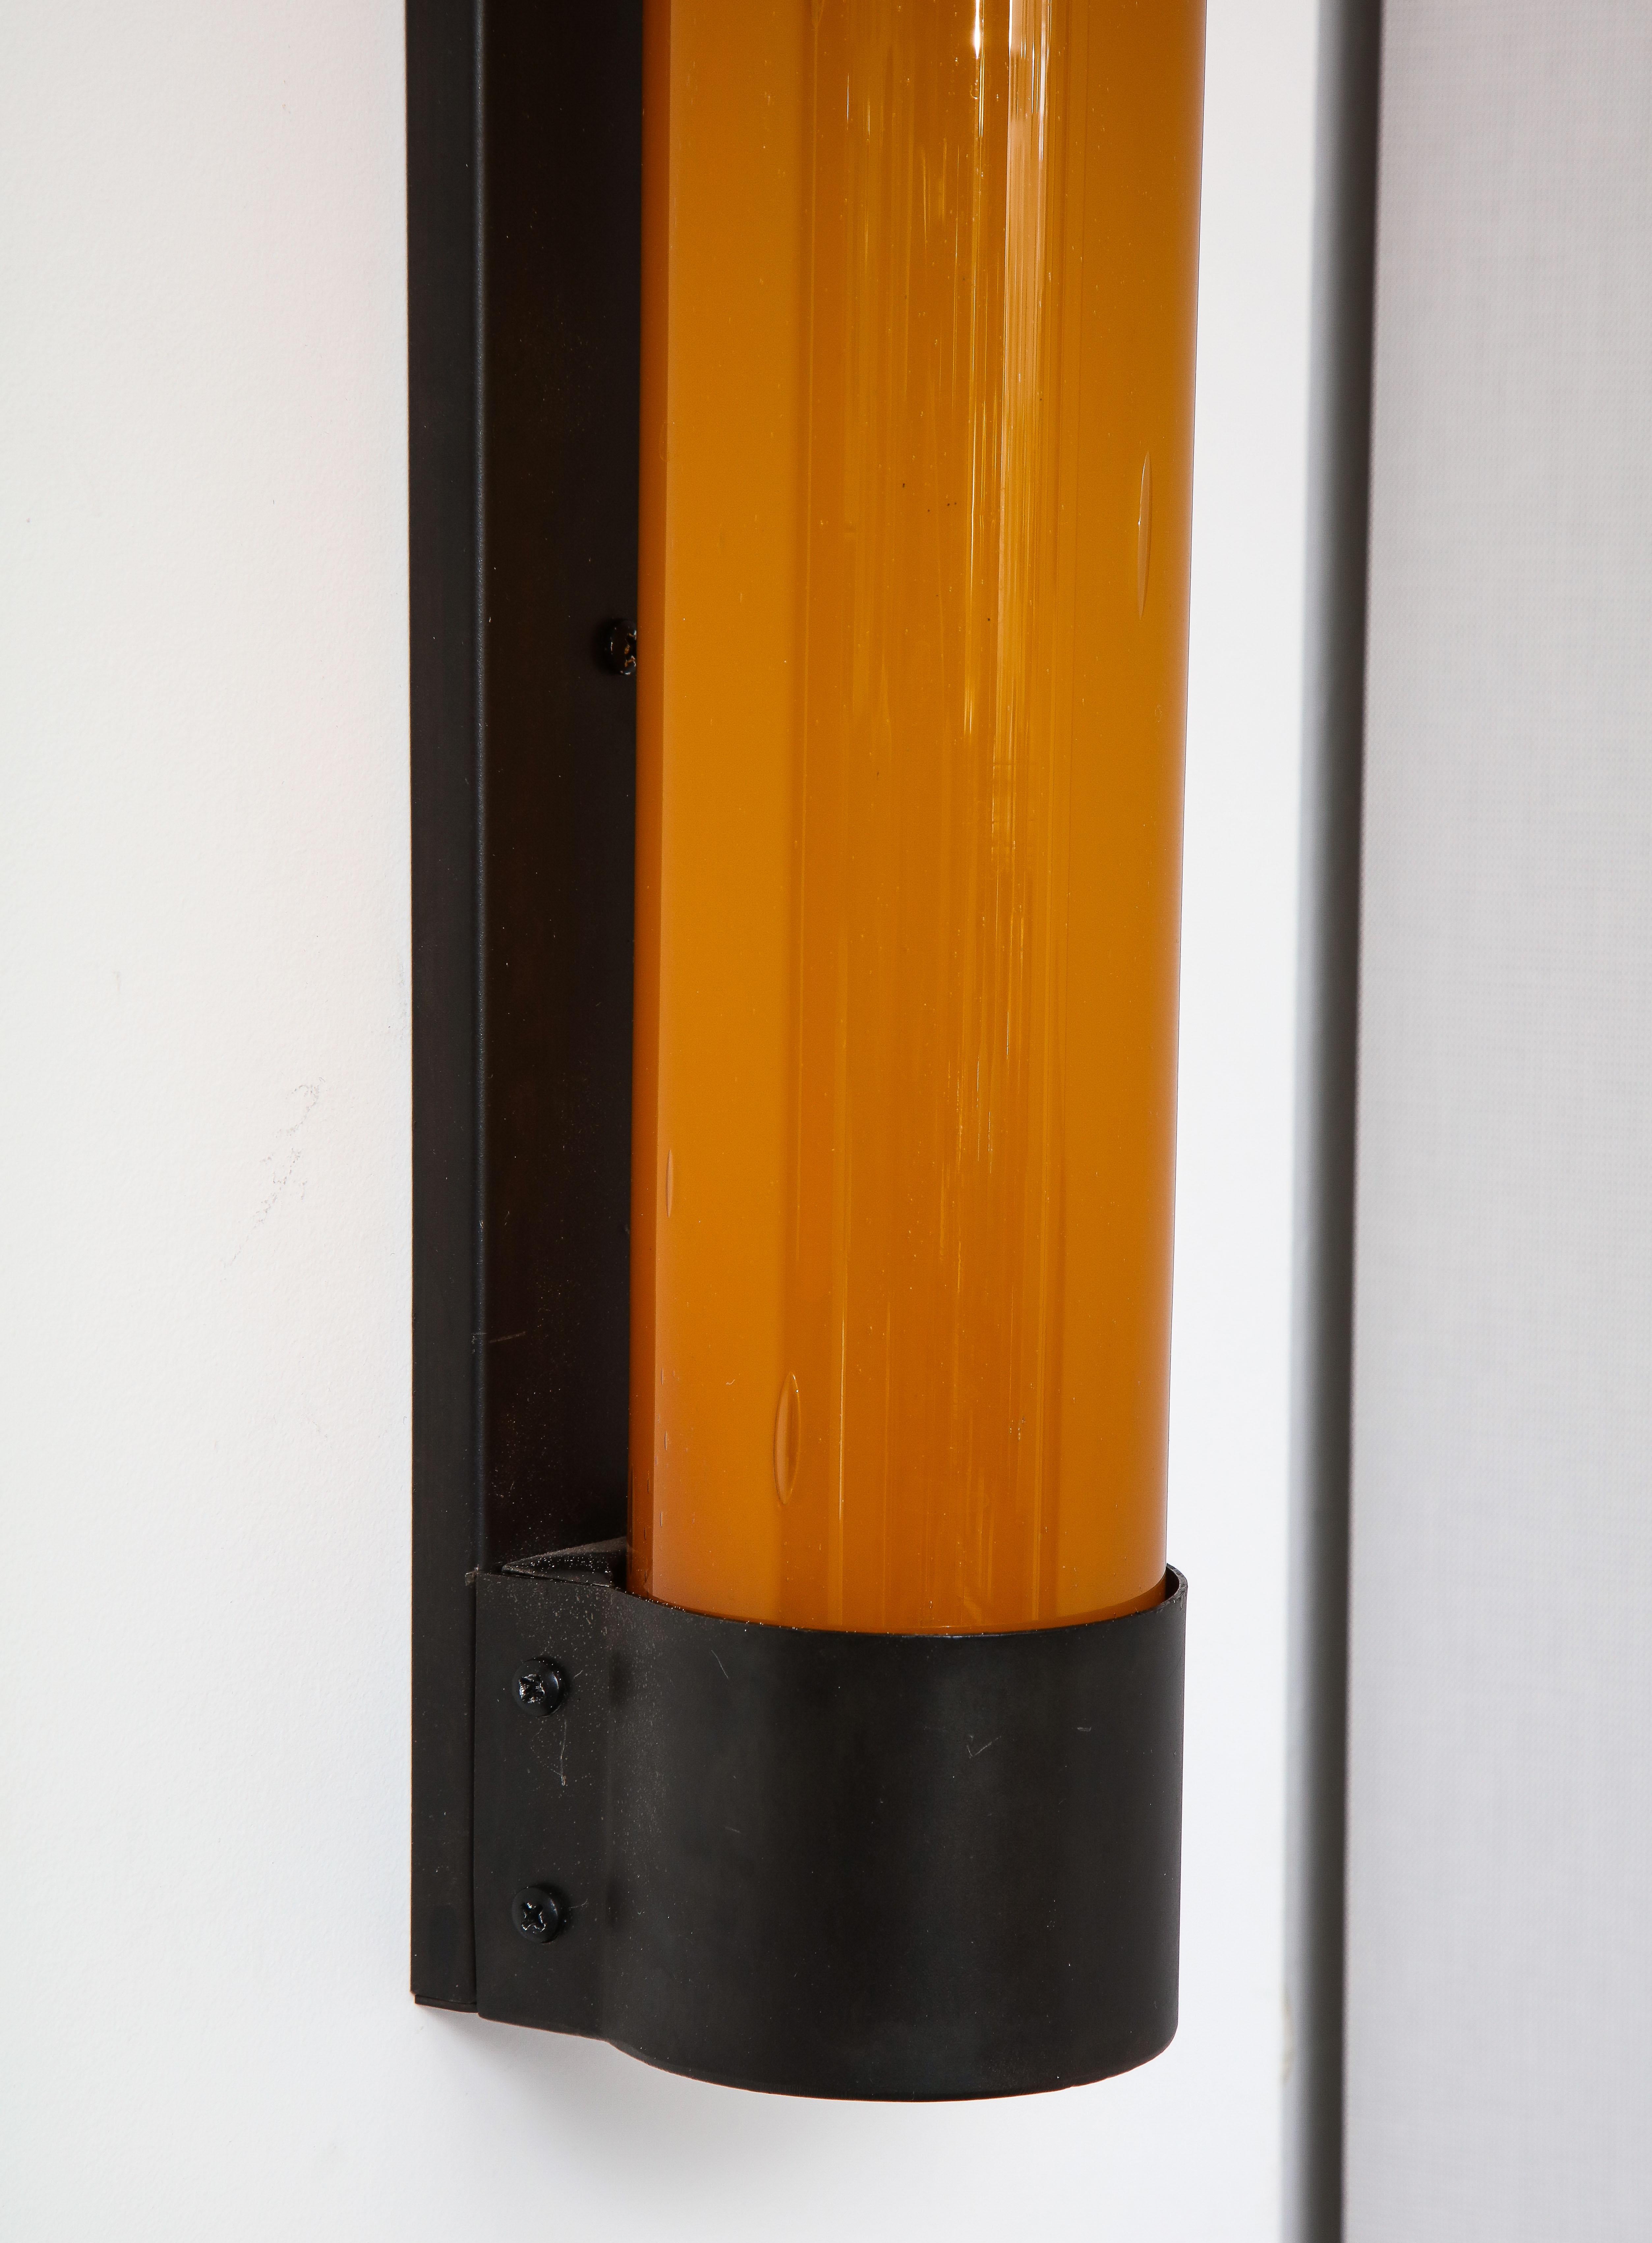 Pair of Large Amber Glass Sconces by Savoy Studios, '4 Pairs Available' For Sale 2